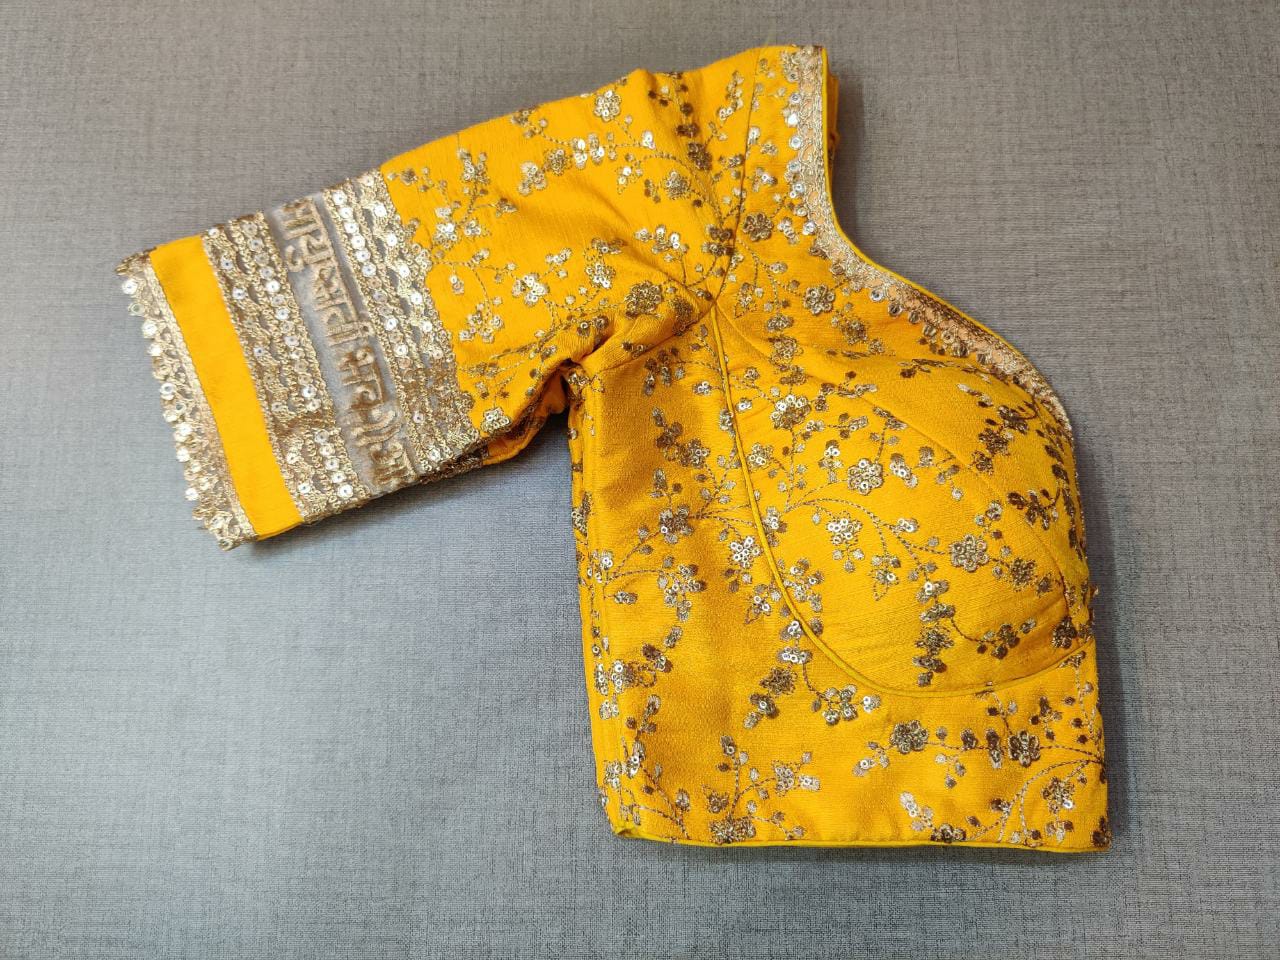 Buy yellow embroidered designer saree blouse with golden lace border,floral pattern and back open with hook online in USA. Pair this fancy designer sari blouse with mantra lace border, dori ties and long sleeve with ethnic sari, designer saree blouses online, sari blouse from Pure Elegance Indian fashion store in USA.- Sleeve.